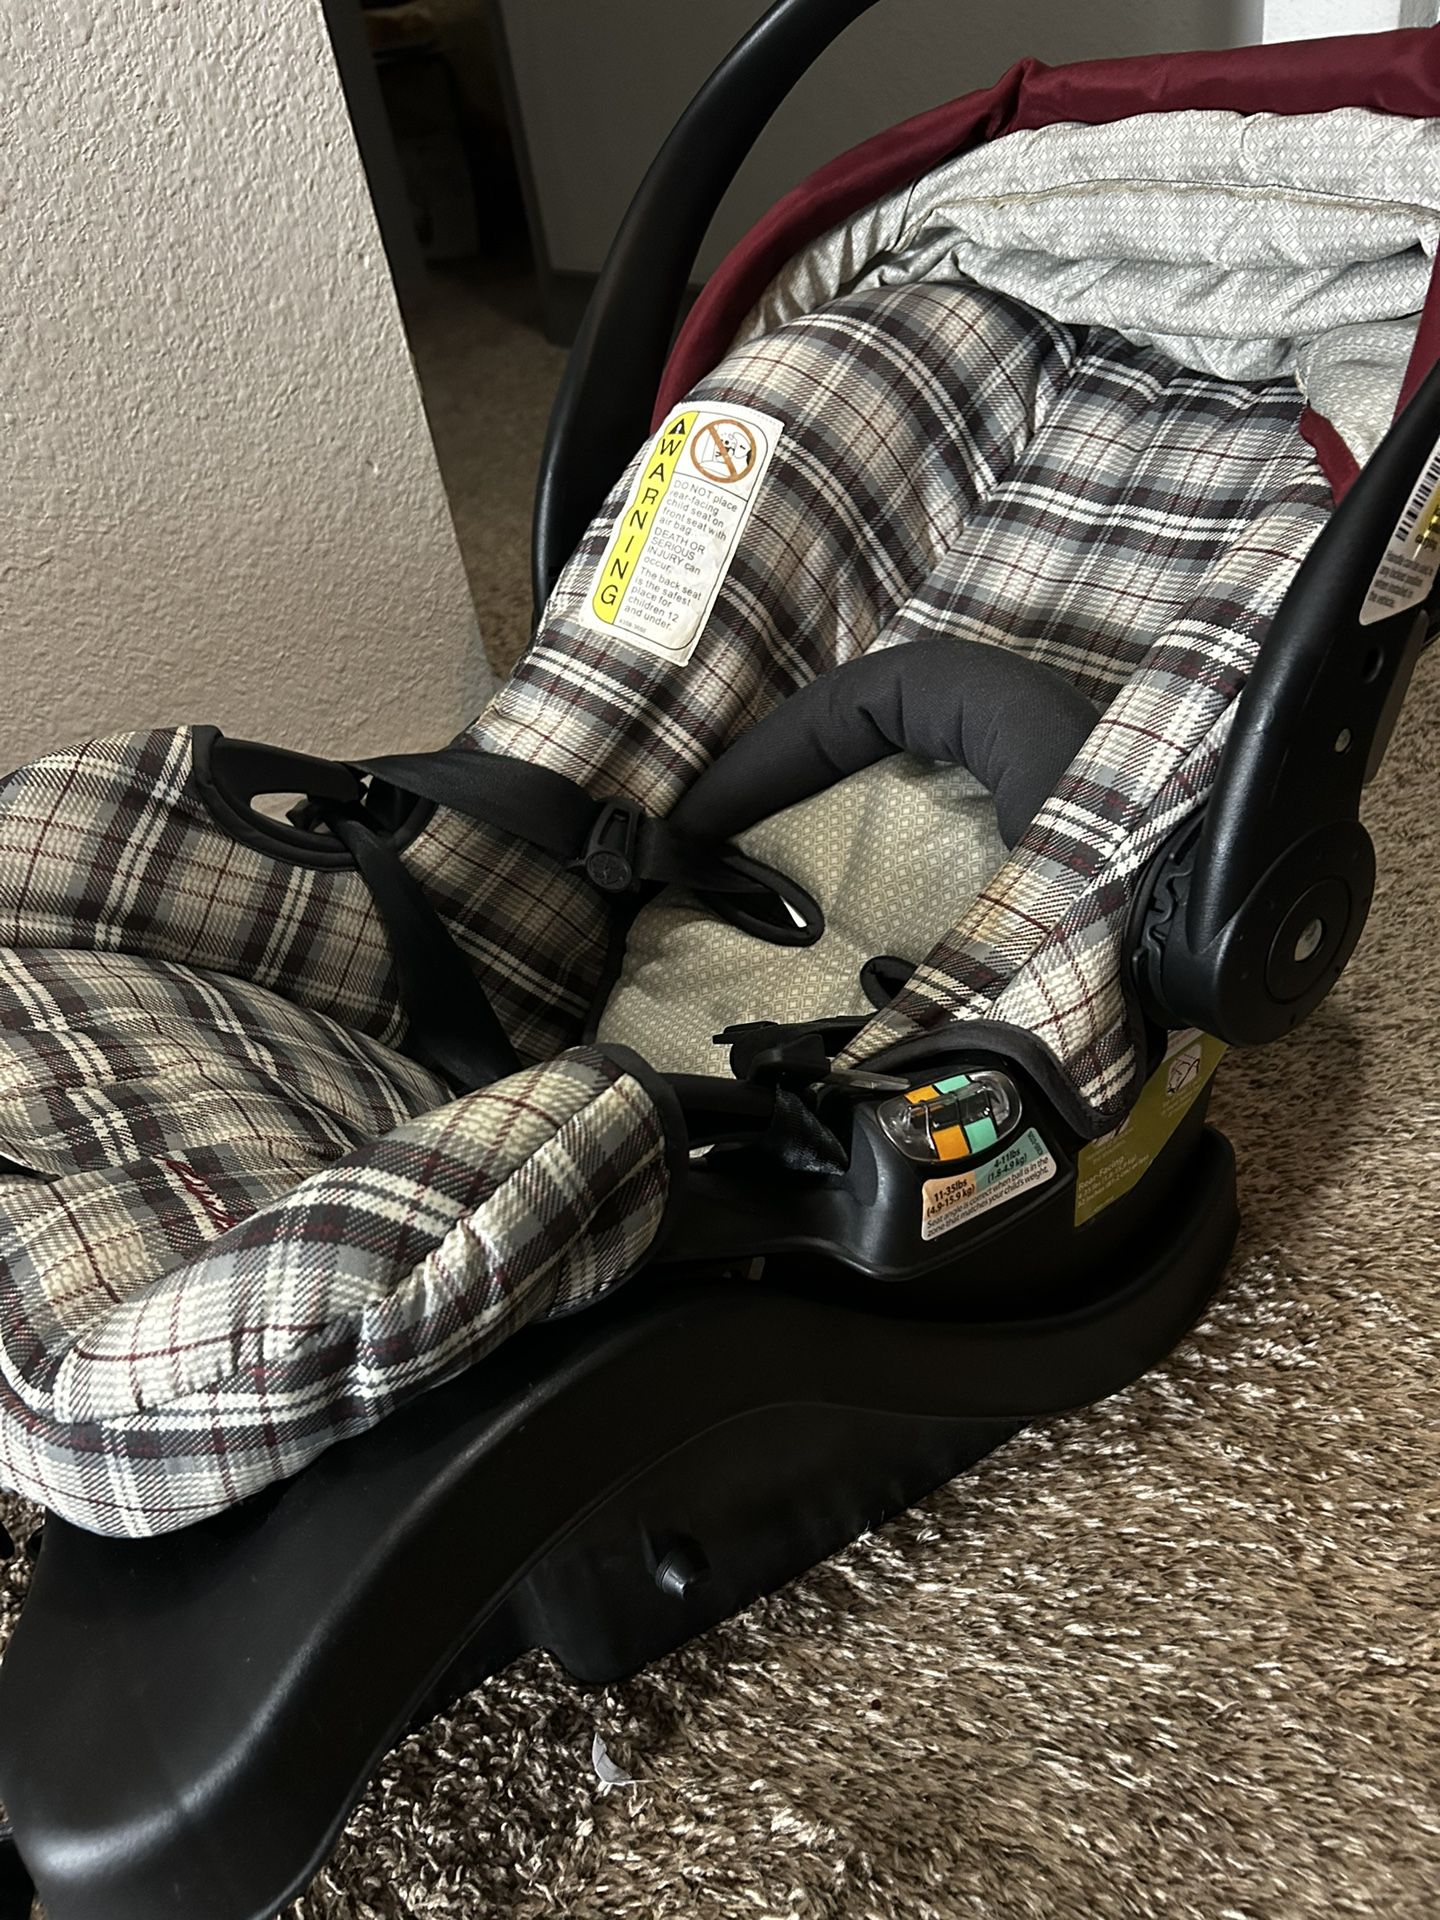 Eddie Bauer Infant Car Seat - High Quality For free- Pick tomorrow 